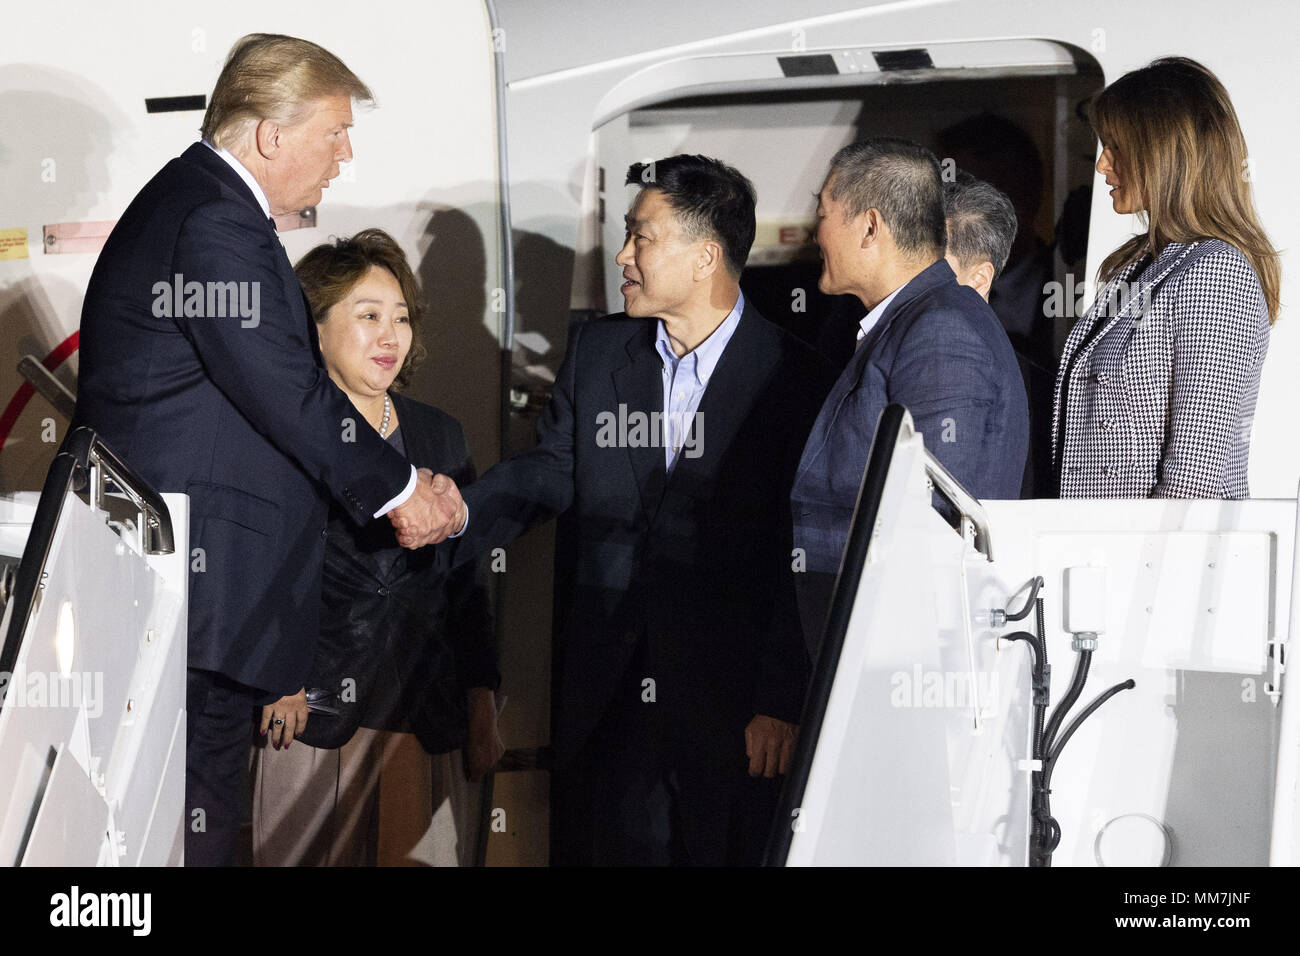 Suitland, MD, USA. 10th May, 2018. President DONALD TRUMP and his wife MELANIA TRUMP welcoming the three American detainees (KIM DONG-CHUL, KIM HAK-SONG, and TONY KIM) held in captivity in North Korea at Joint Base Andrews in Suitland, Maryland on May 10, 2018. Credit: Michael Brochstein/ZUMA Wire/Alamy Live News Stock Photo